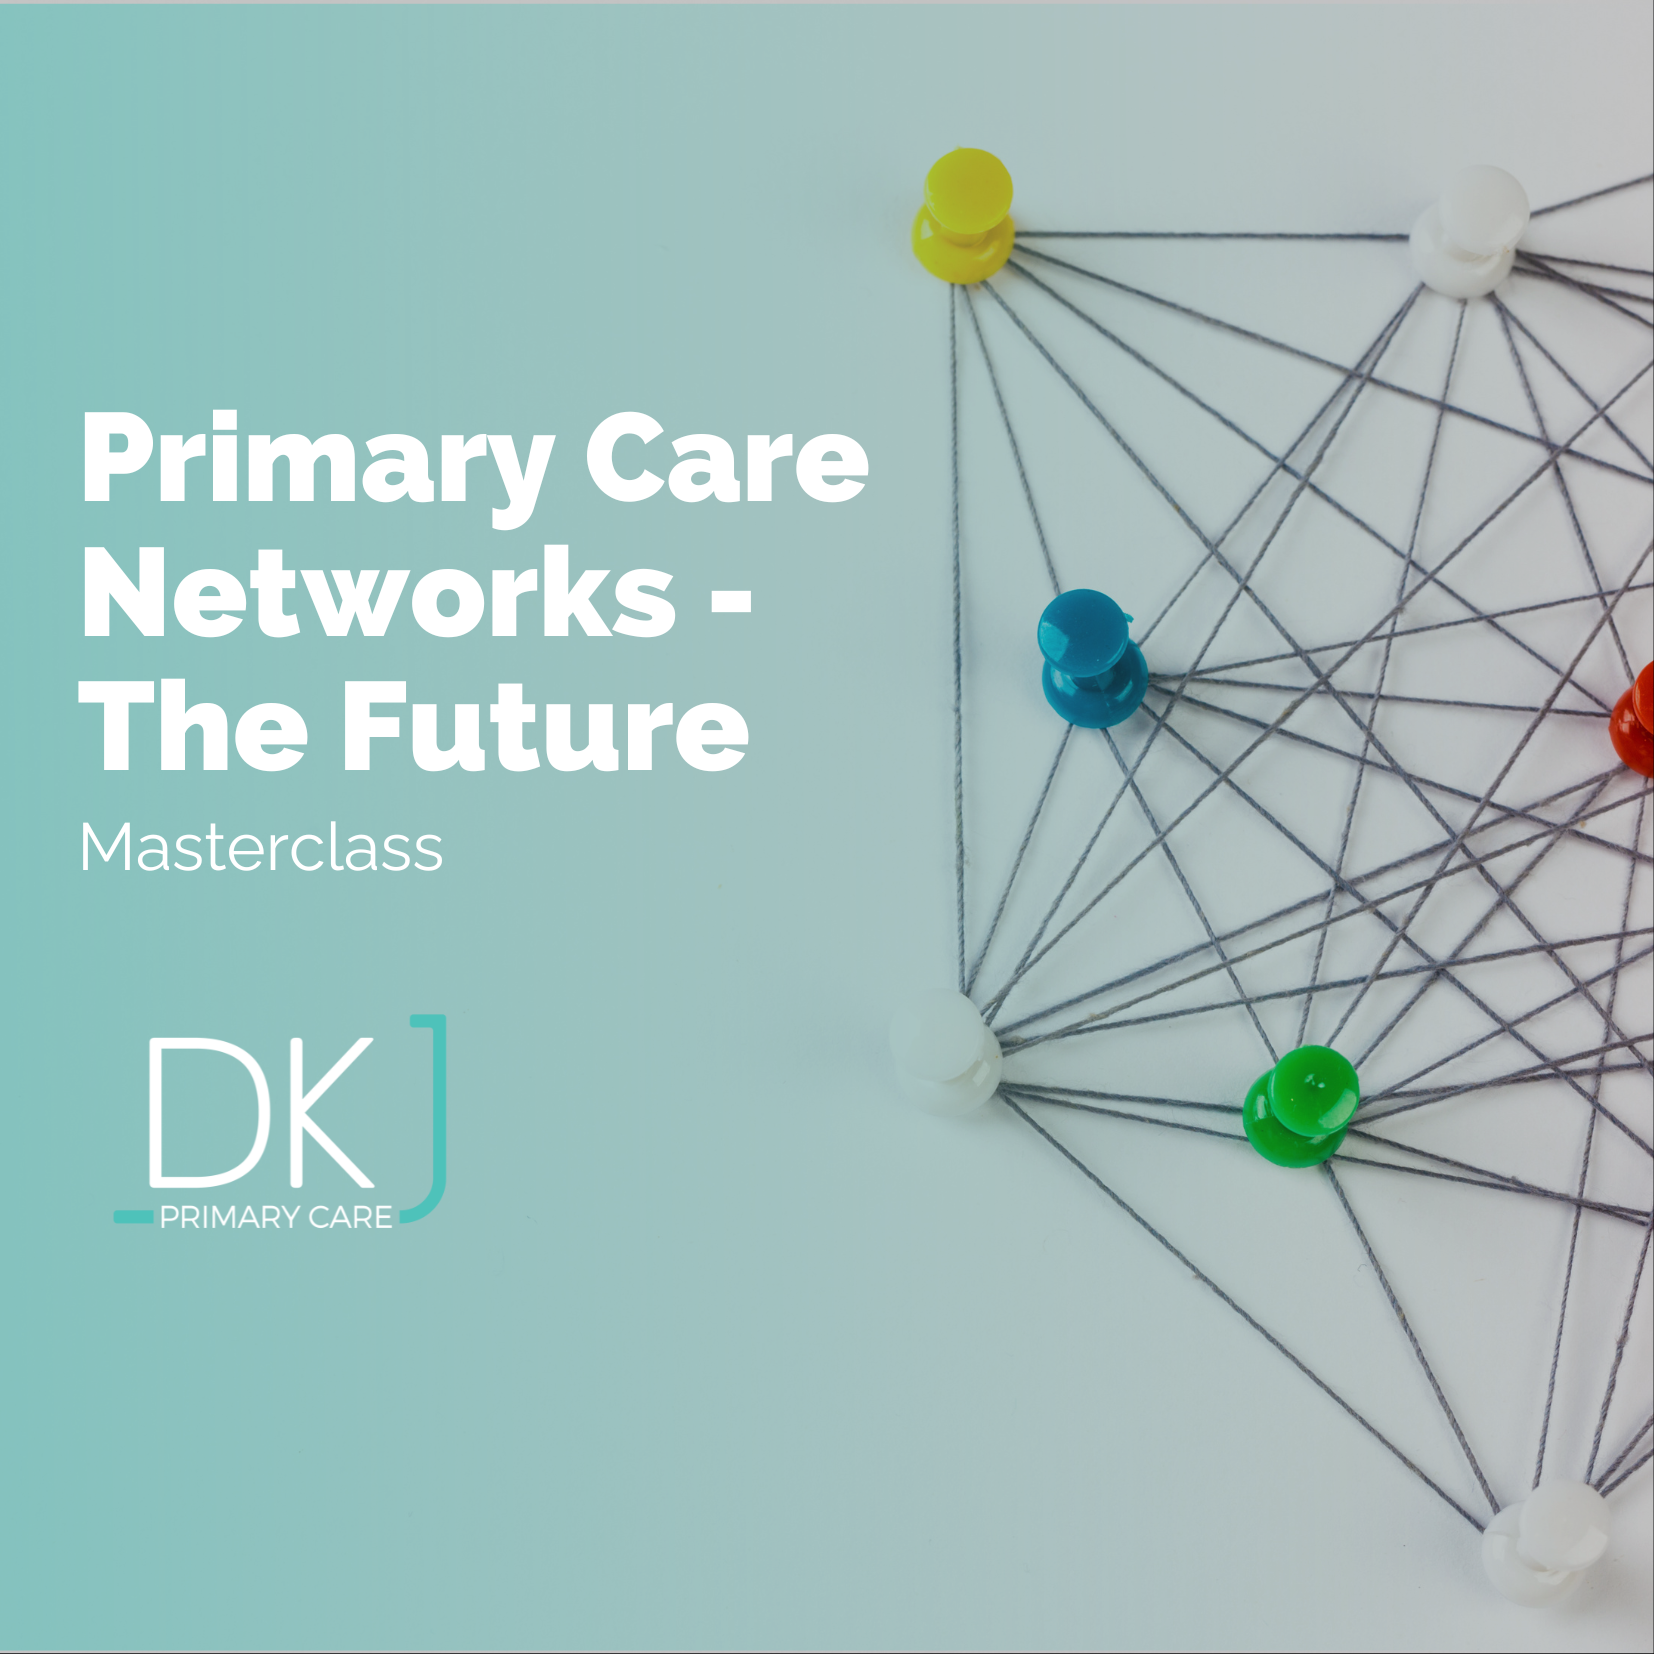 Masterclass: The Future of Primary Care Networks